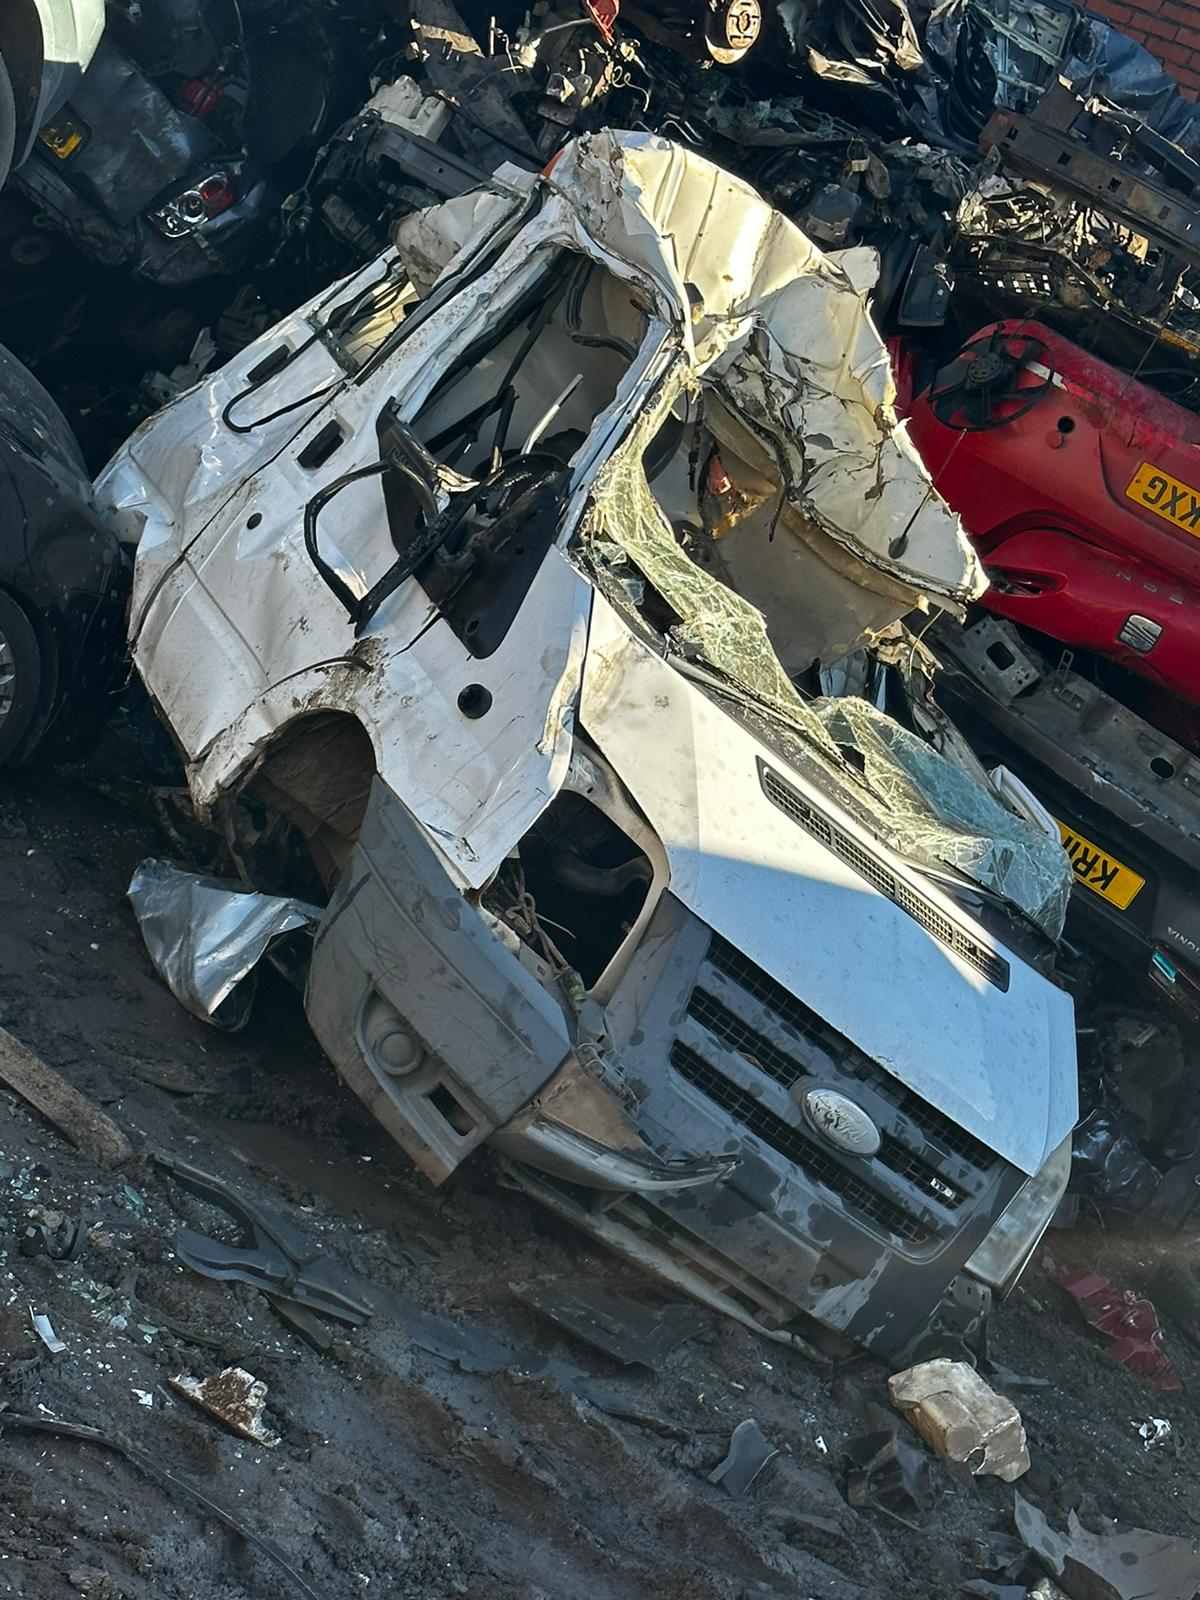 Fly-tipping vehicle dismantled and crushed